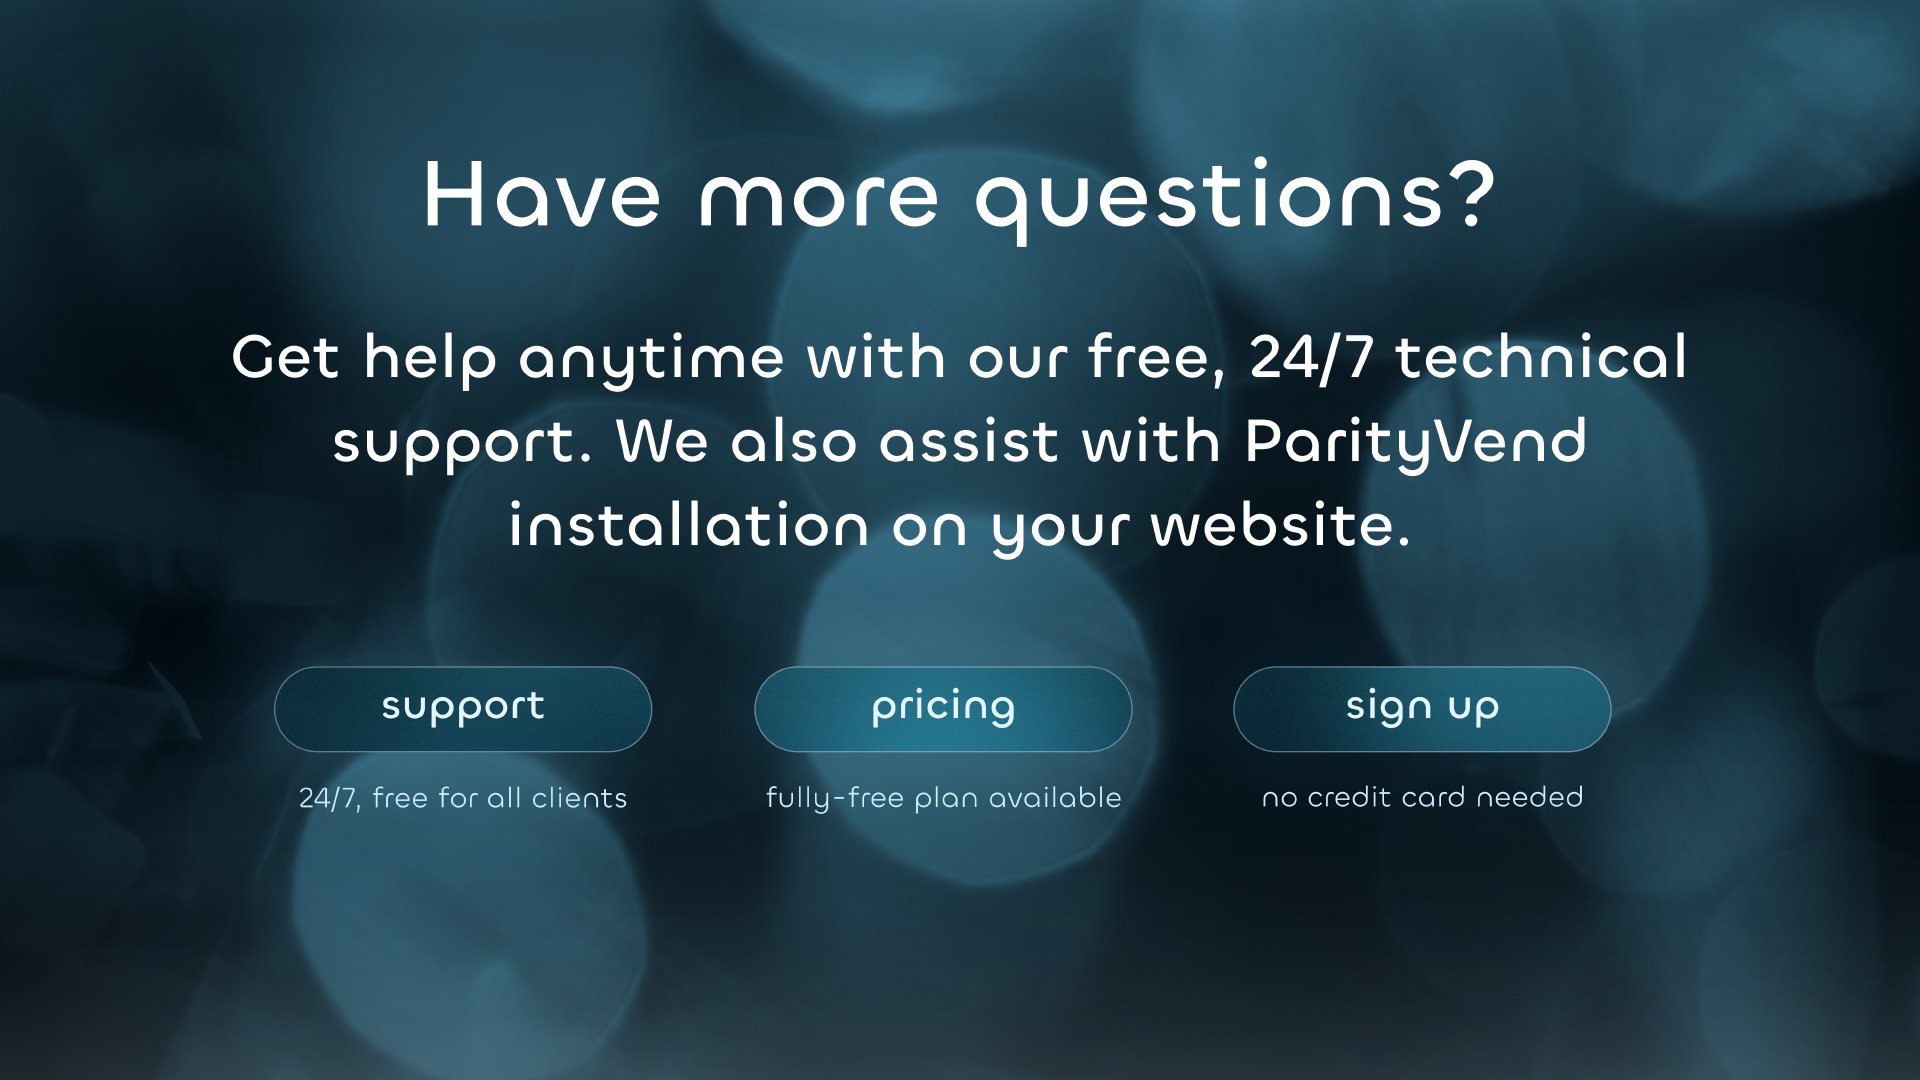 Have more questions? Get help anytime with our free, 24/7 technical support. We also assist with ParityVend installation on your website. Support | Pricing | Sign Up. 24/7, free for all clients | Fully-free plan available | No credit card needed